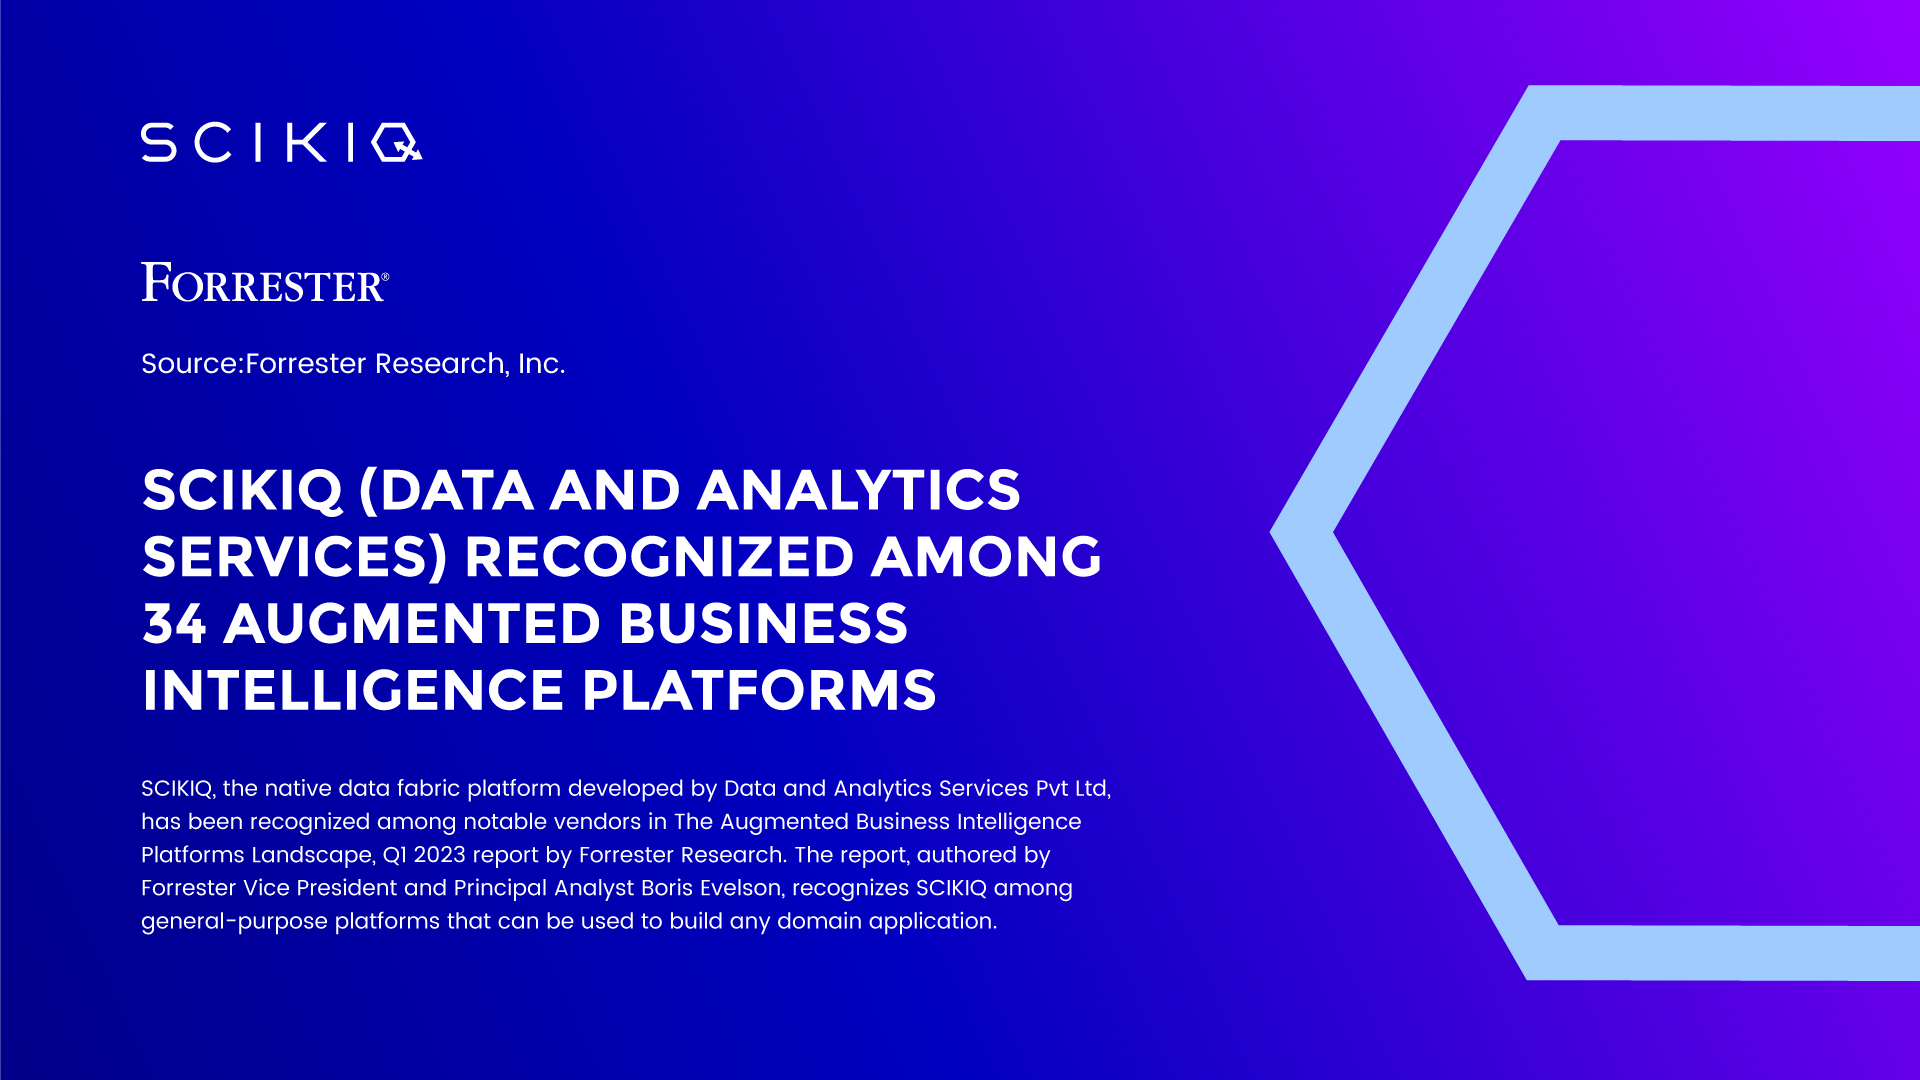 Scikiq is ranked among the top 34 global augmented business intelligence Platforms